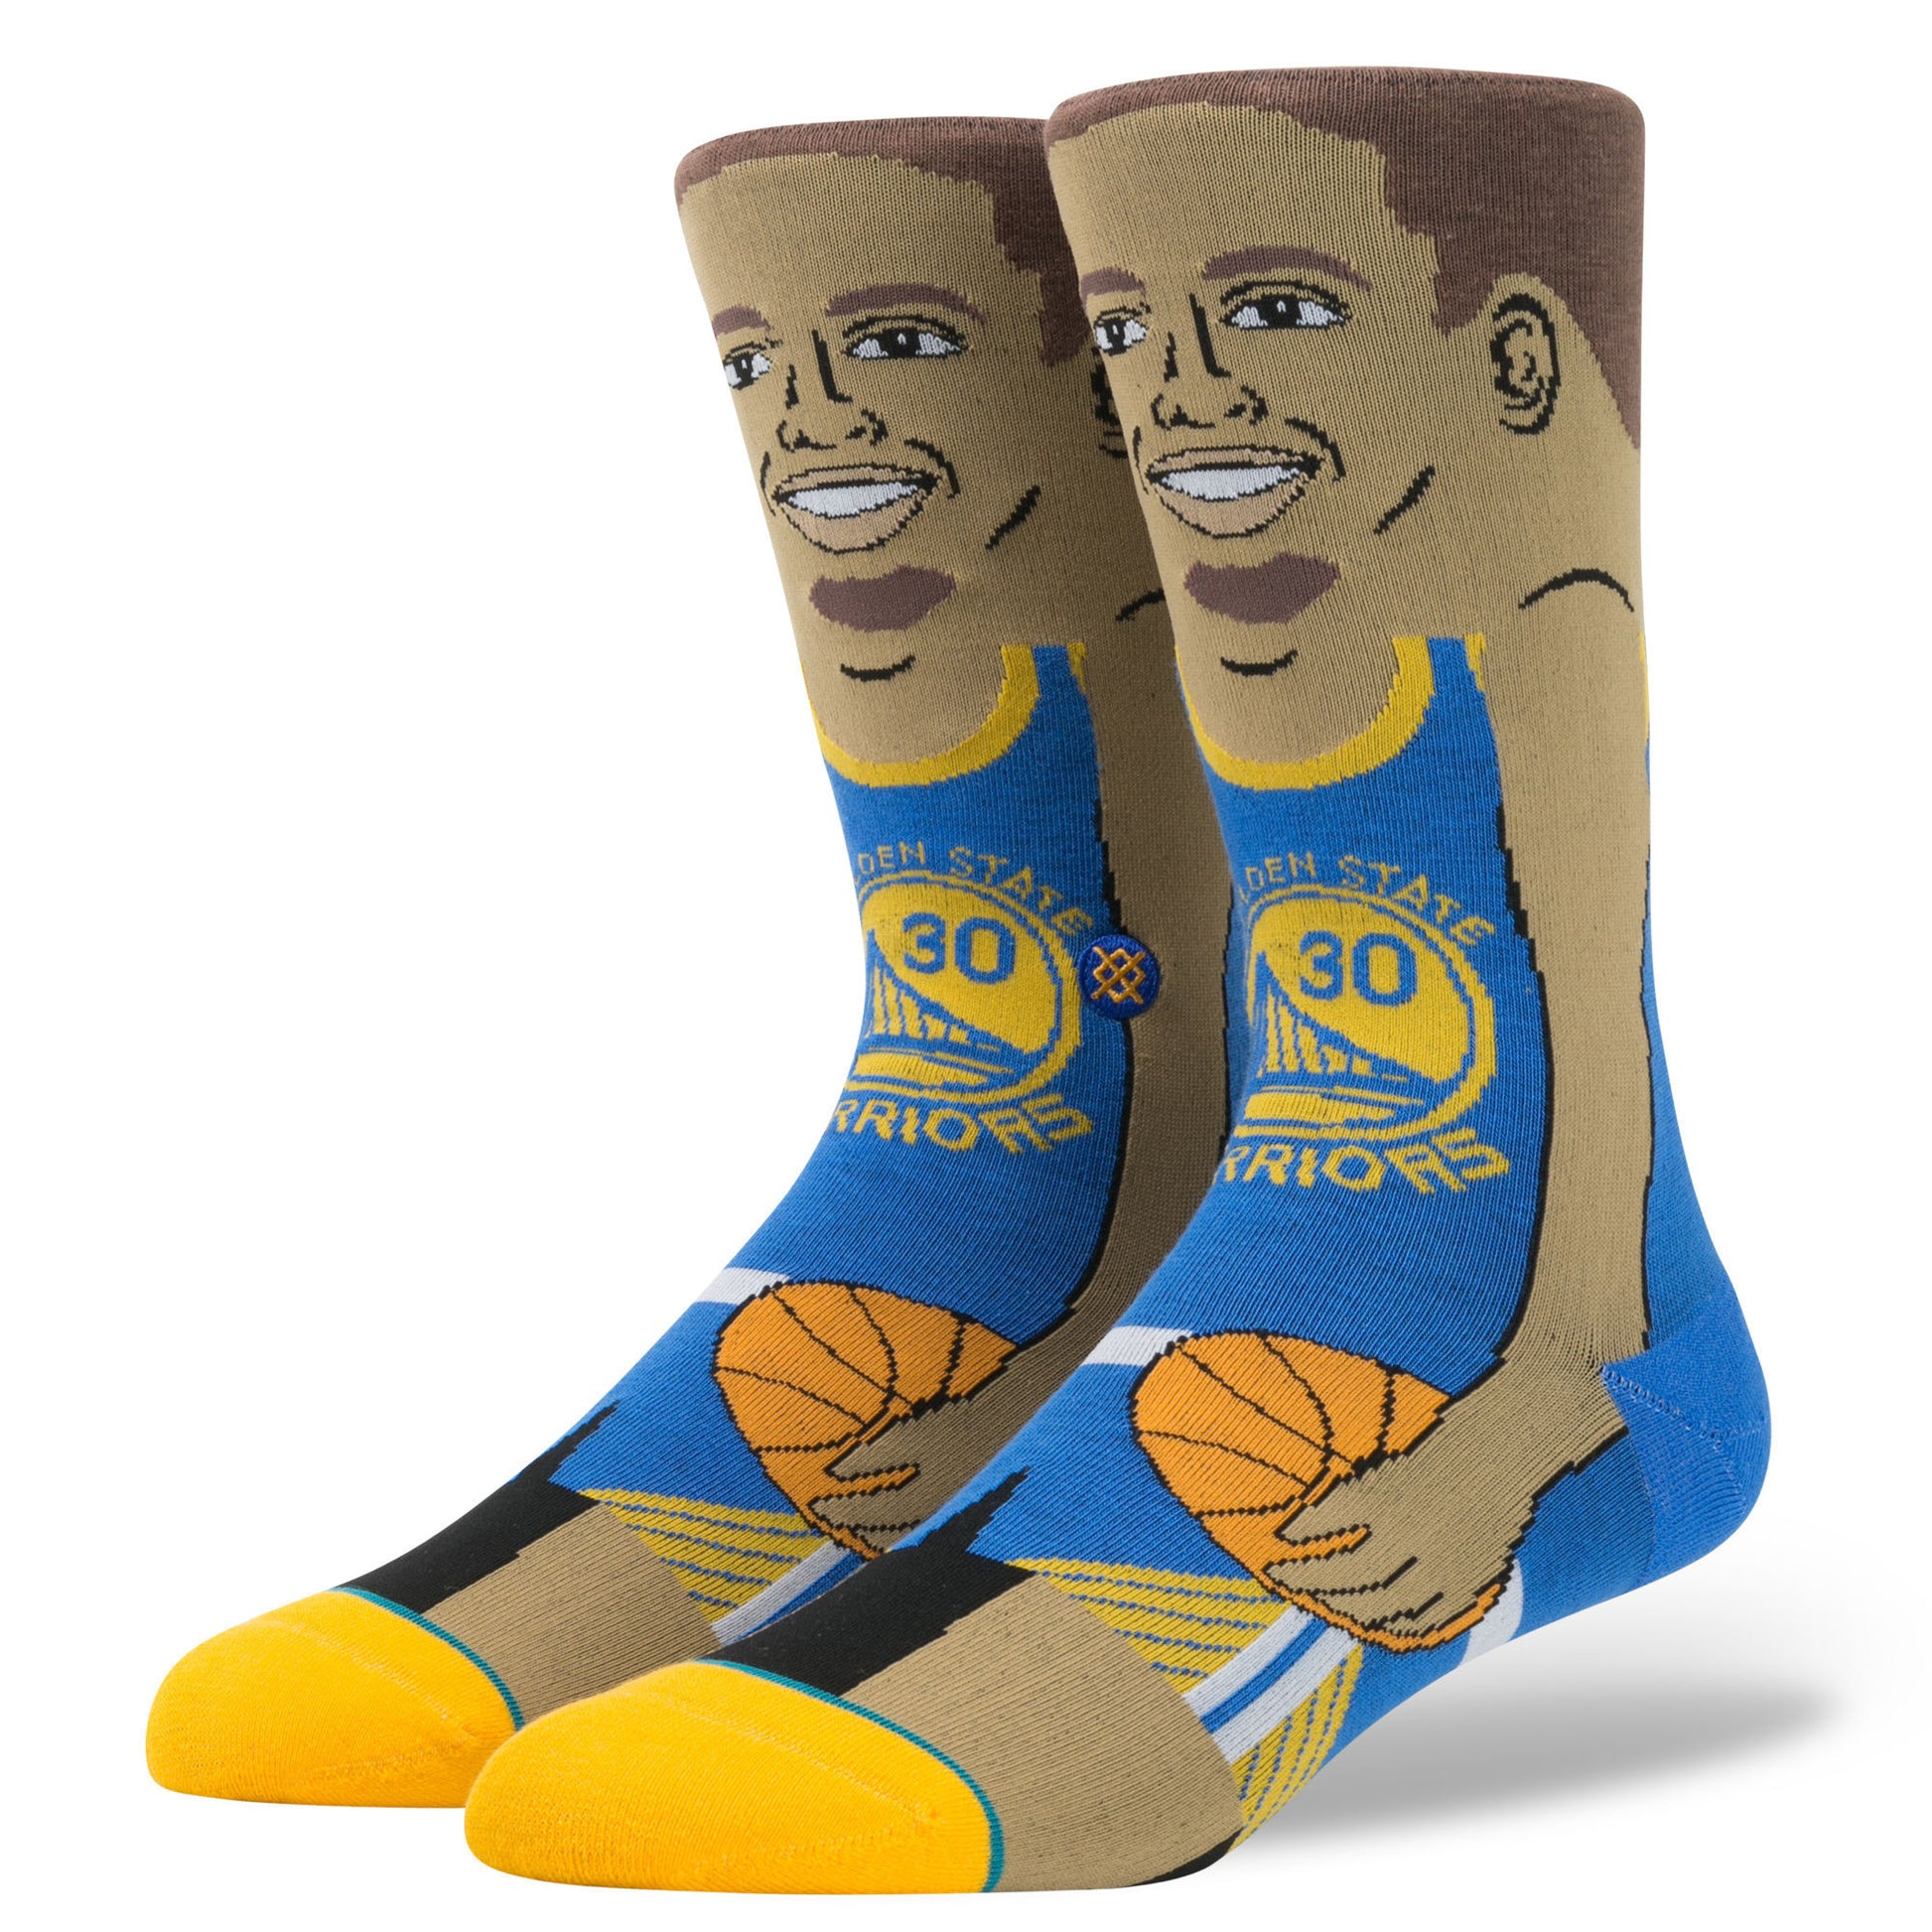 Stance - S. Curry Men's Socks, Blue - The Giant Peach